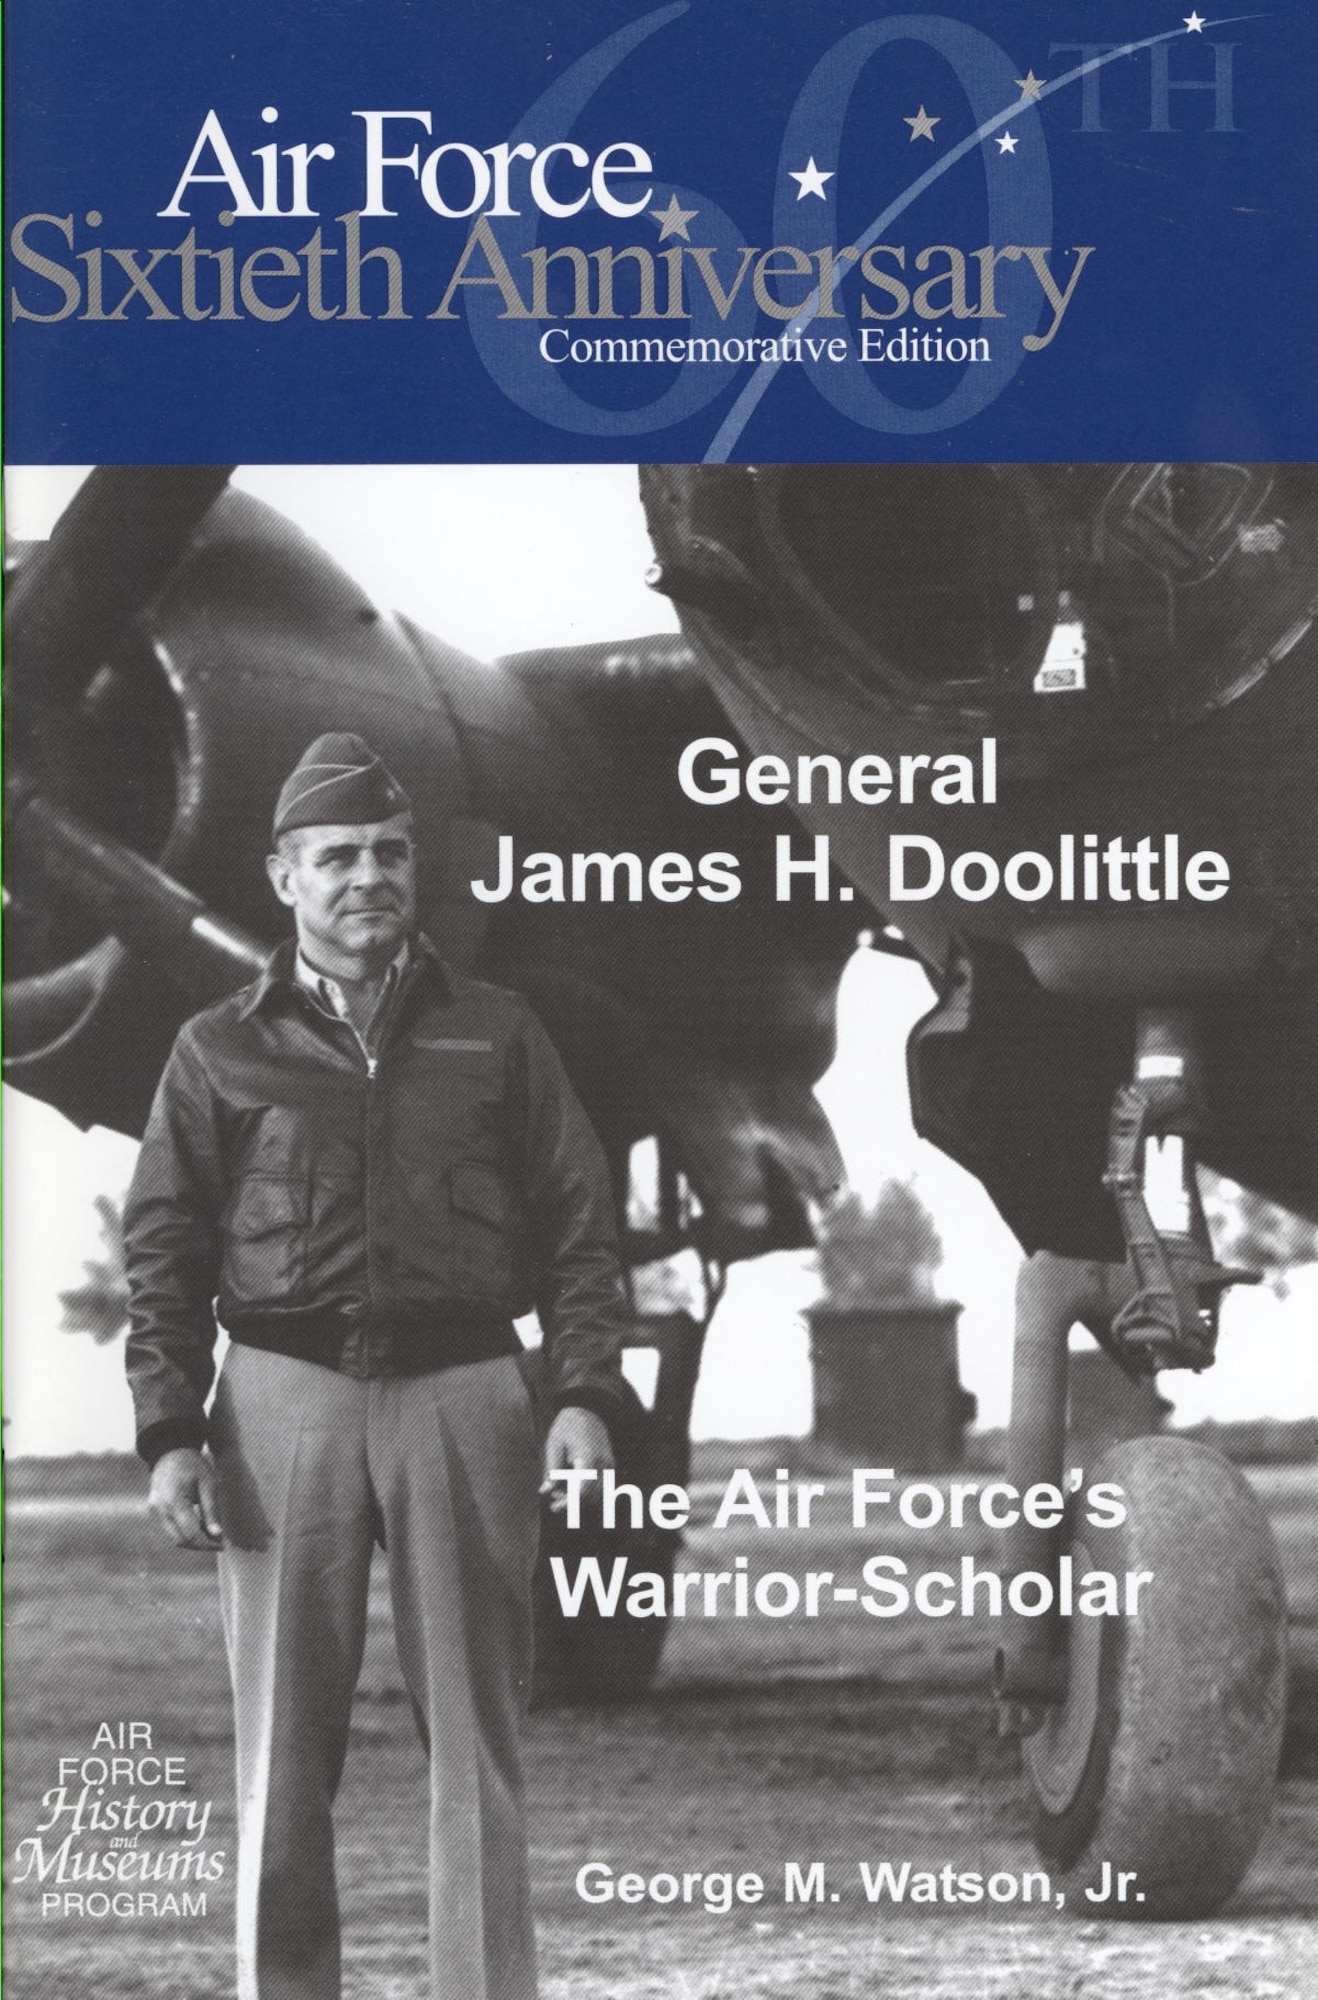 General James H. Doolittle was a pioneer aviator, engineer, and scientist whose career spanned powered flight's first century. He joined the Army Air Service during WWI and became an Air Force leader in WWII.  